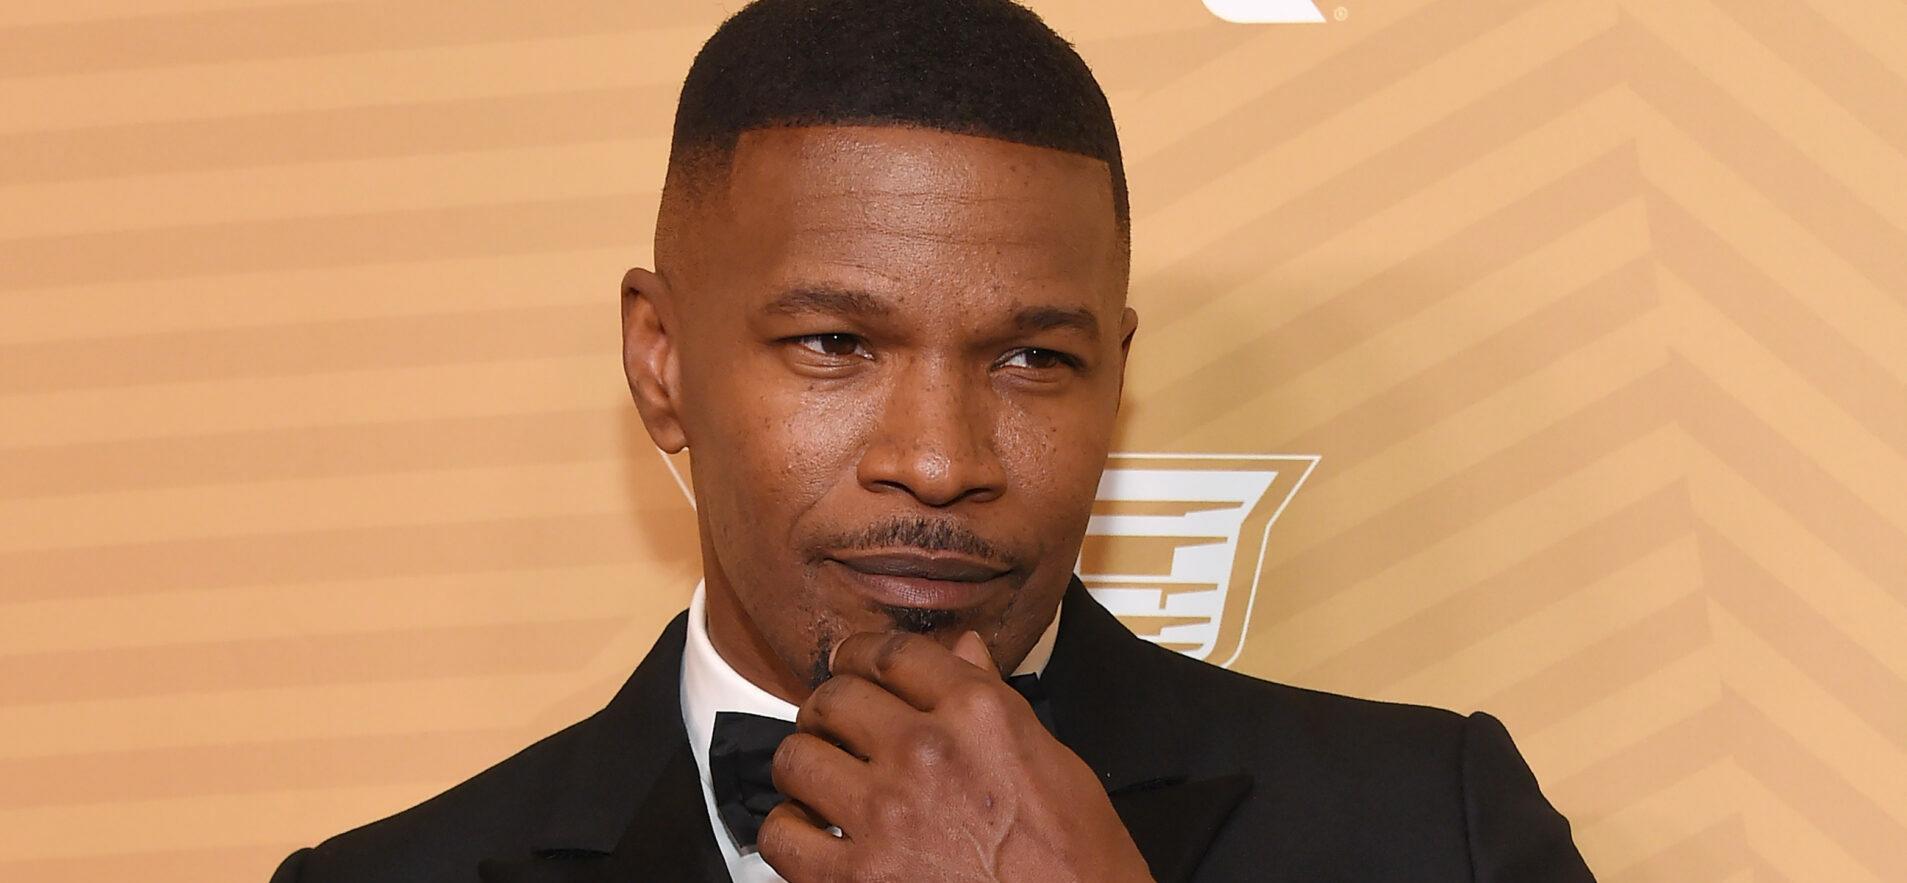 Jamie Foxx Debunks False Rumors About Being ‘Blind’ and ‘Paralyzed’